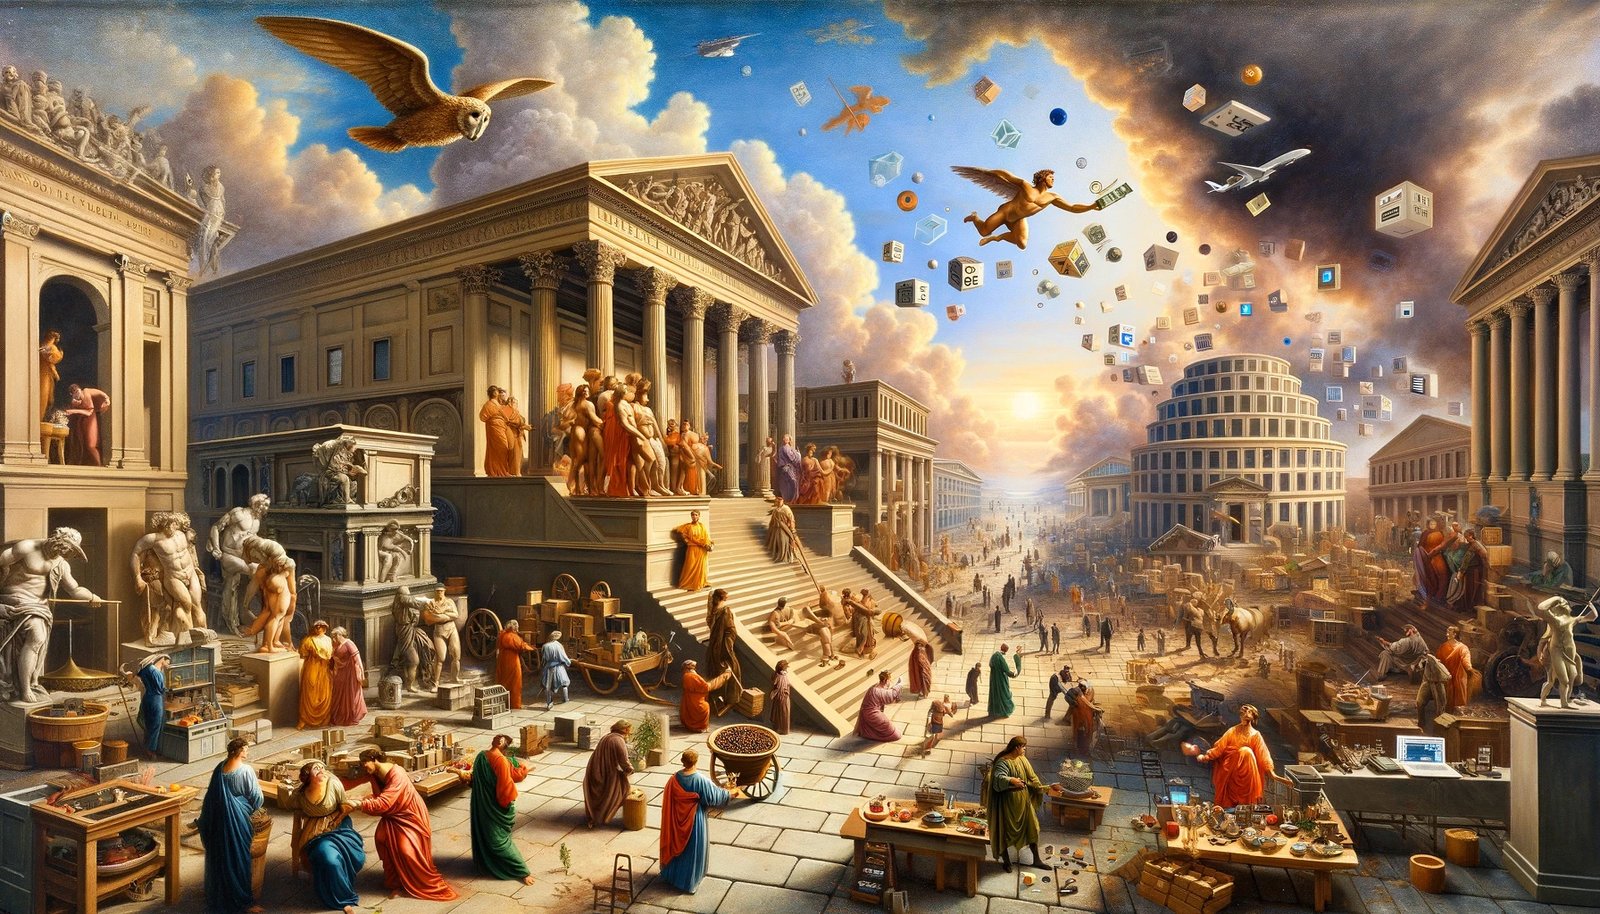 Seamless fusion of Renaissance art and modern economic activity, showcasing allegorical representations of the invisible hand and economic freedom in a bustling digital marketplace set against a backdrop of modern urban life, highlighting the relevance of free market principles today.